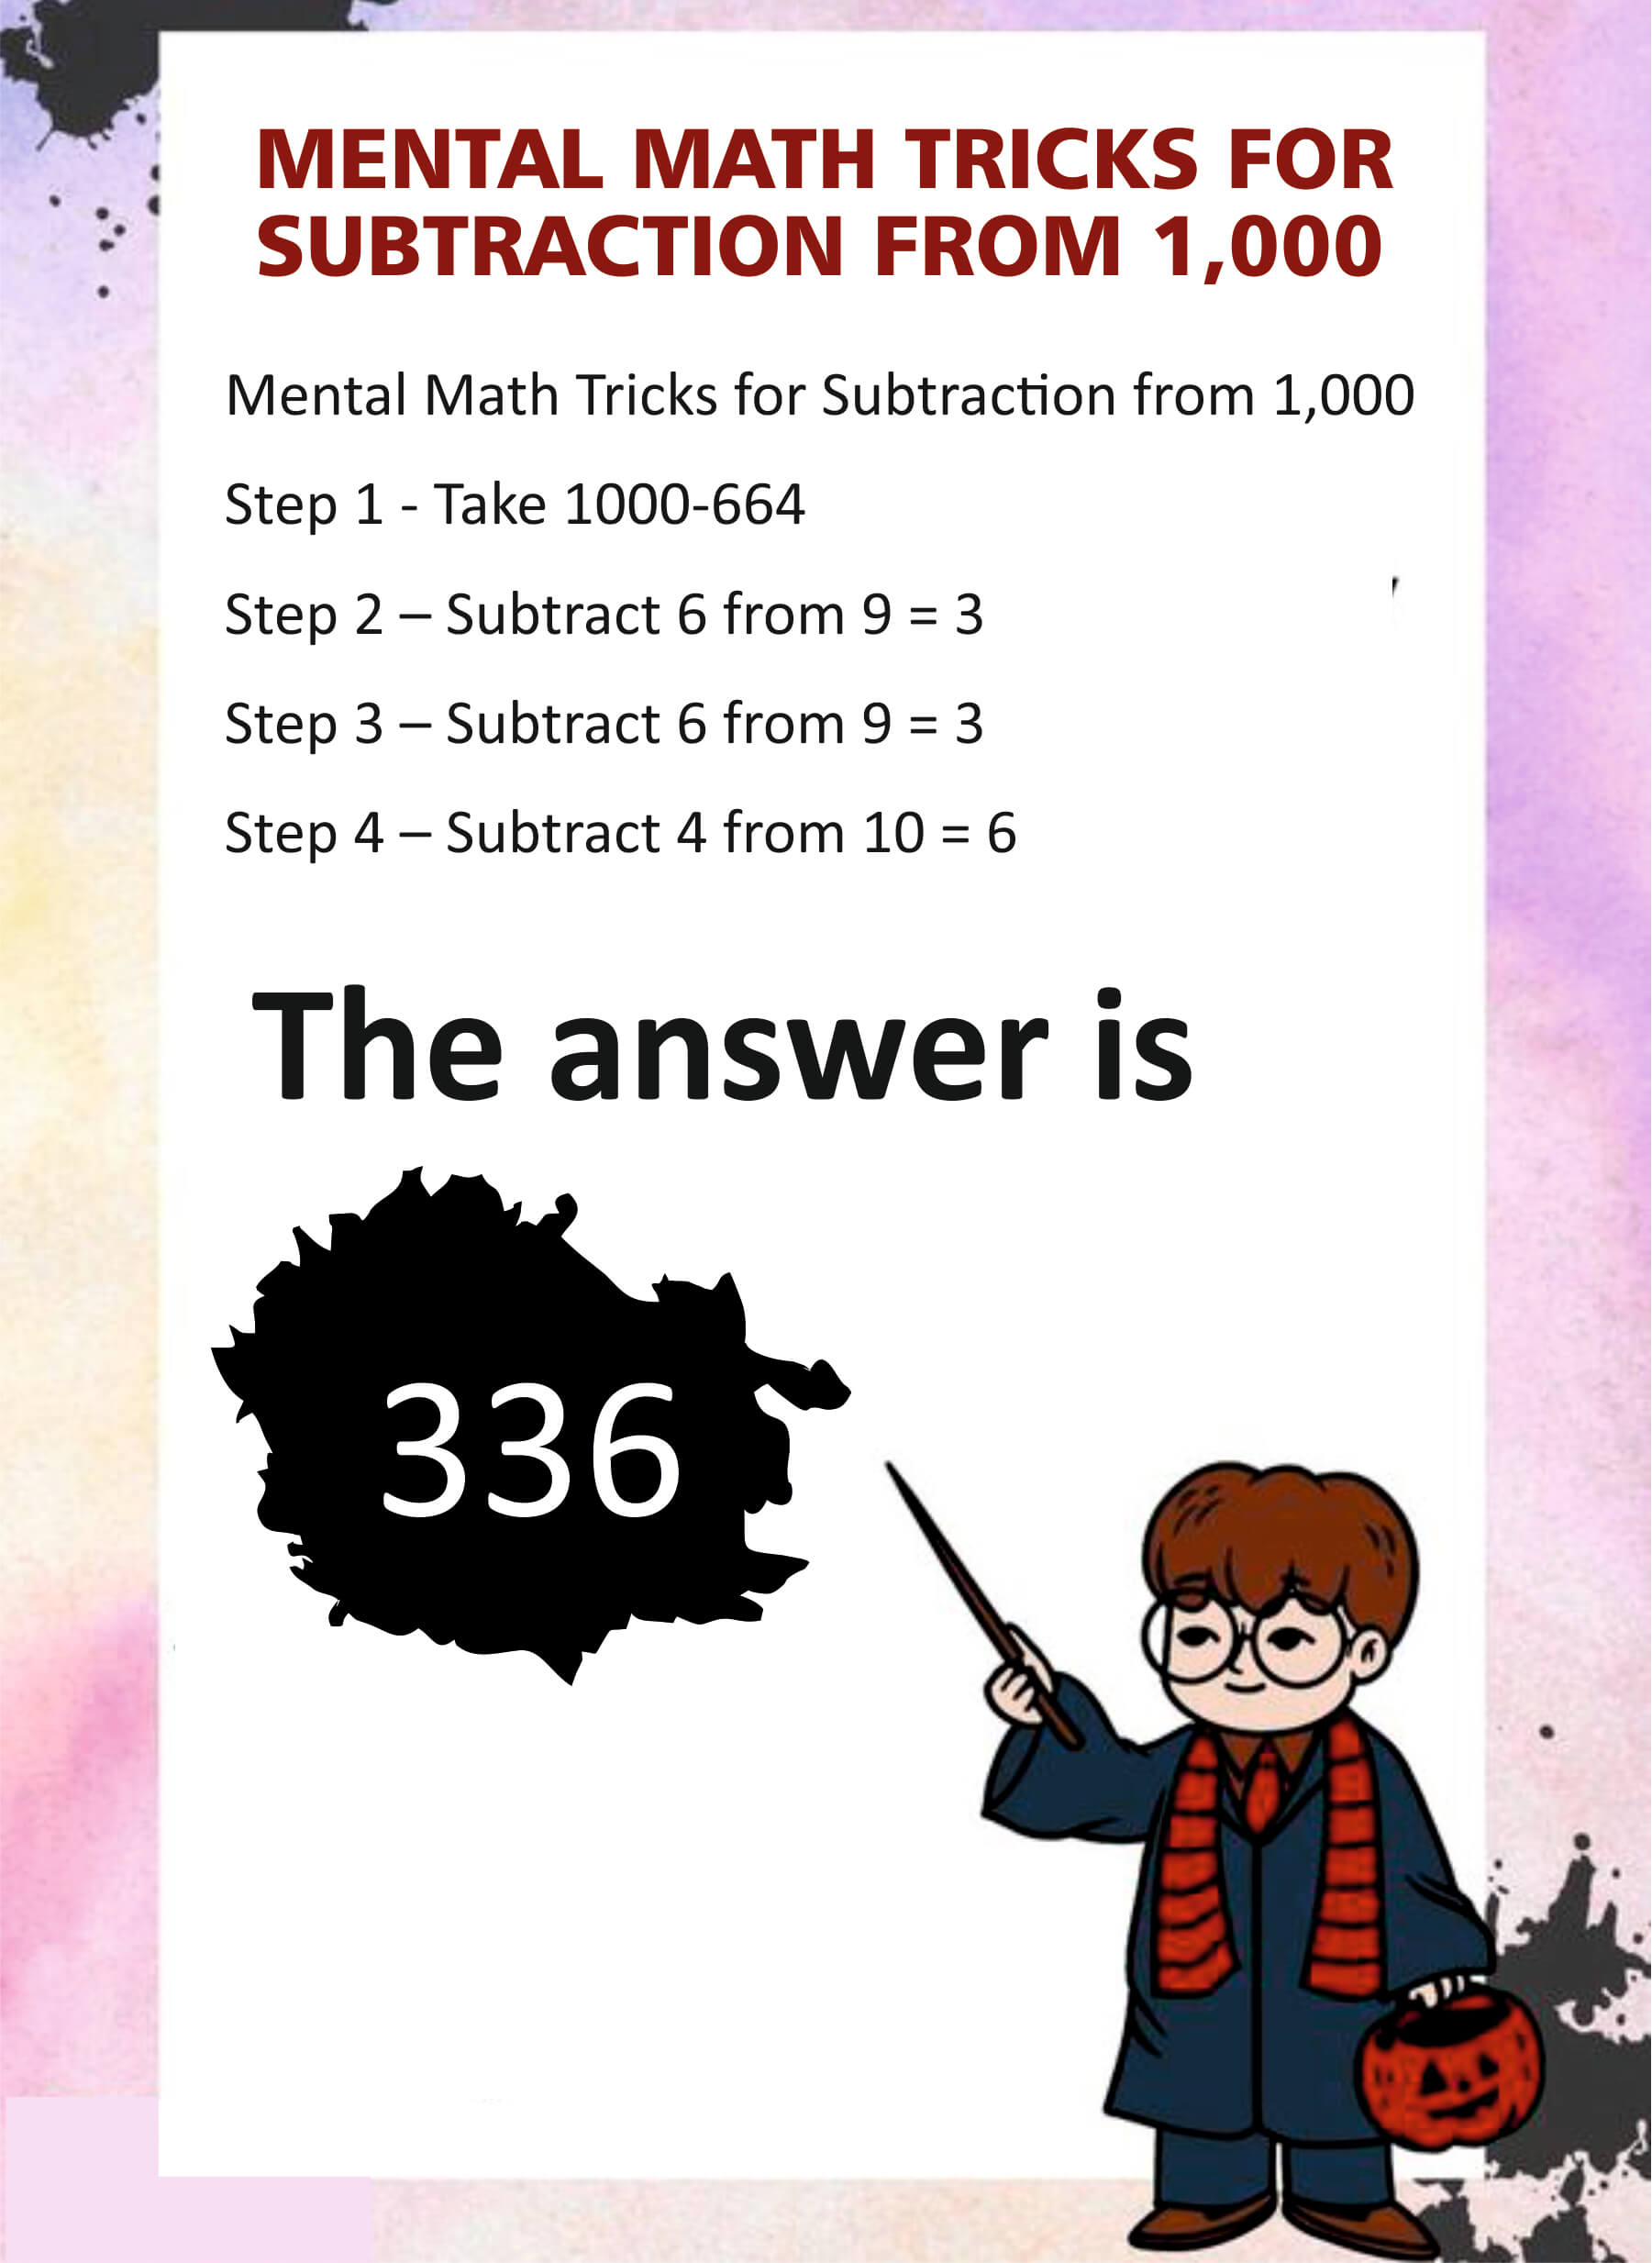 Mental math tricks for Subtraction from 1,000